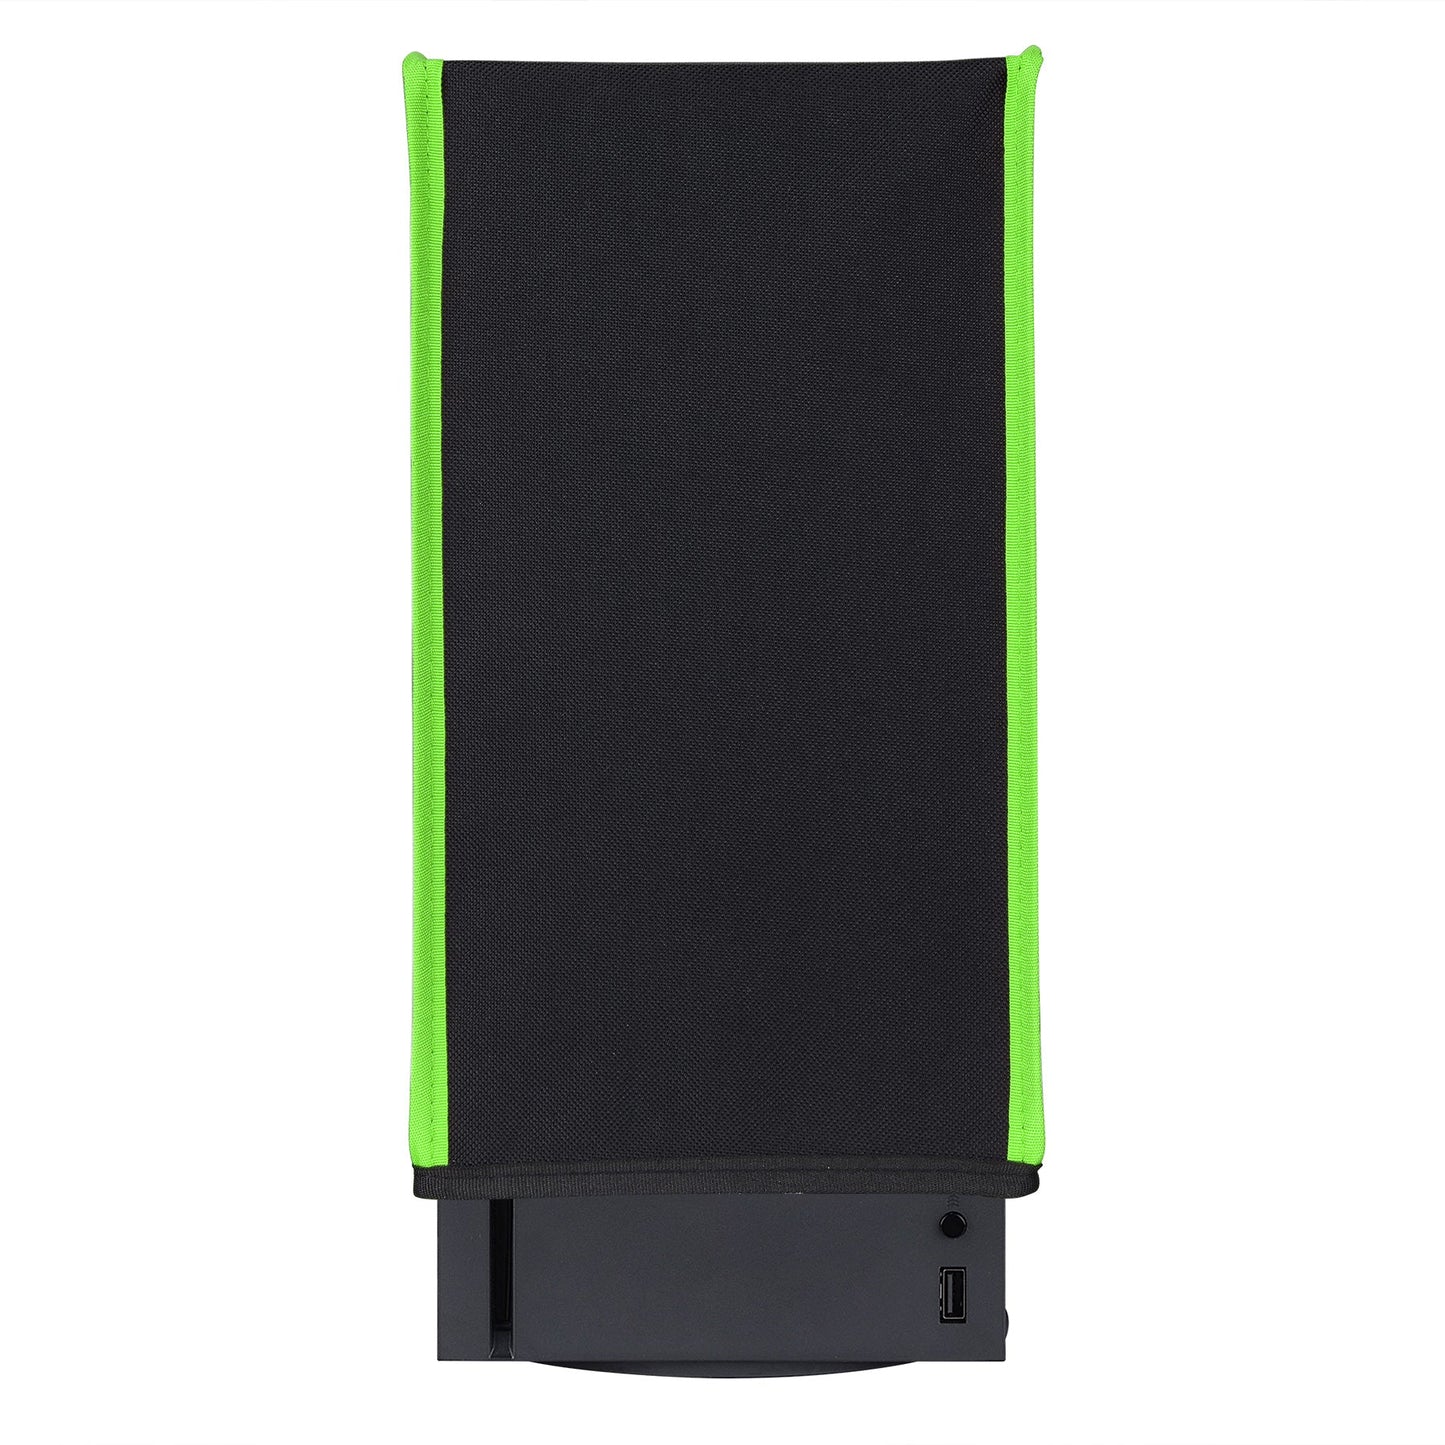 PlayVital Black & Neon Green Trim Nylon Dust Cover for Xbox Series X Console, Soft Neat Lining Dust Guard, Anti Scratch Waterproof Cover Sleeve for Xbox Series X Console - X3PJ011 PlayVital